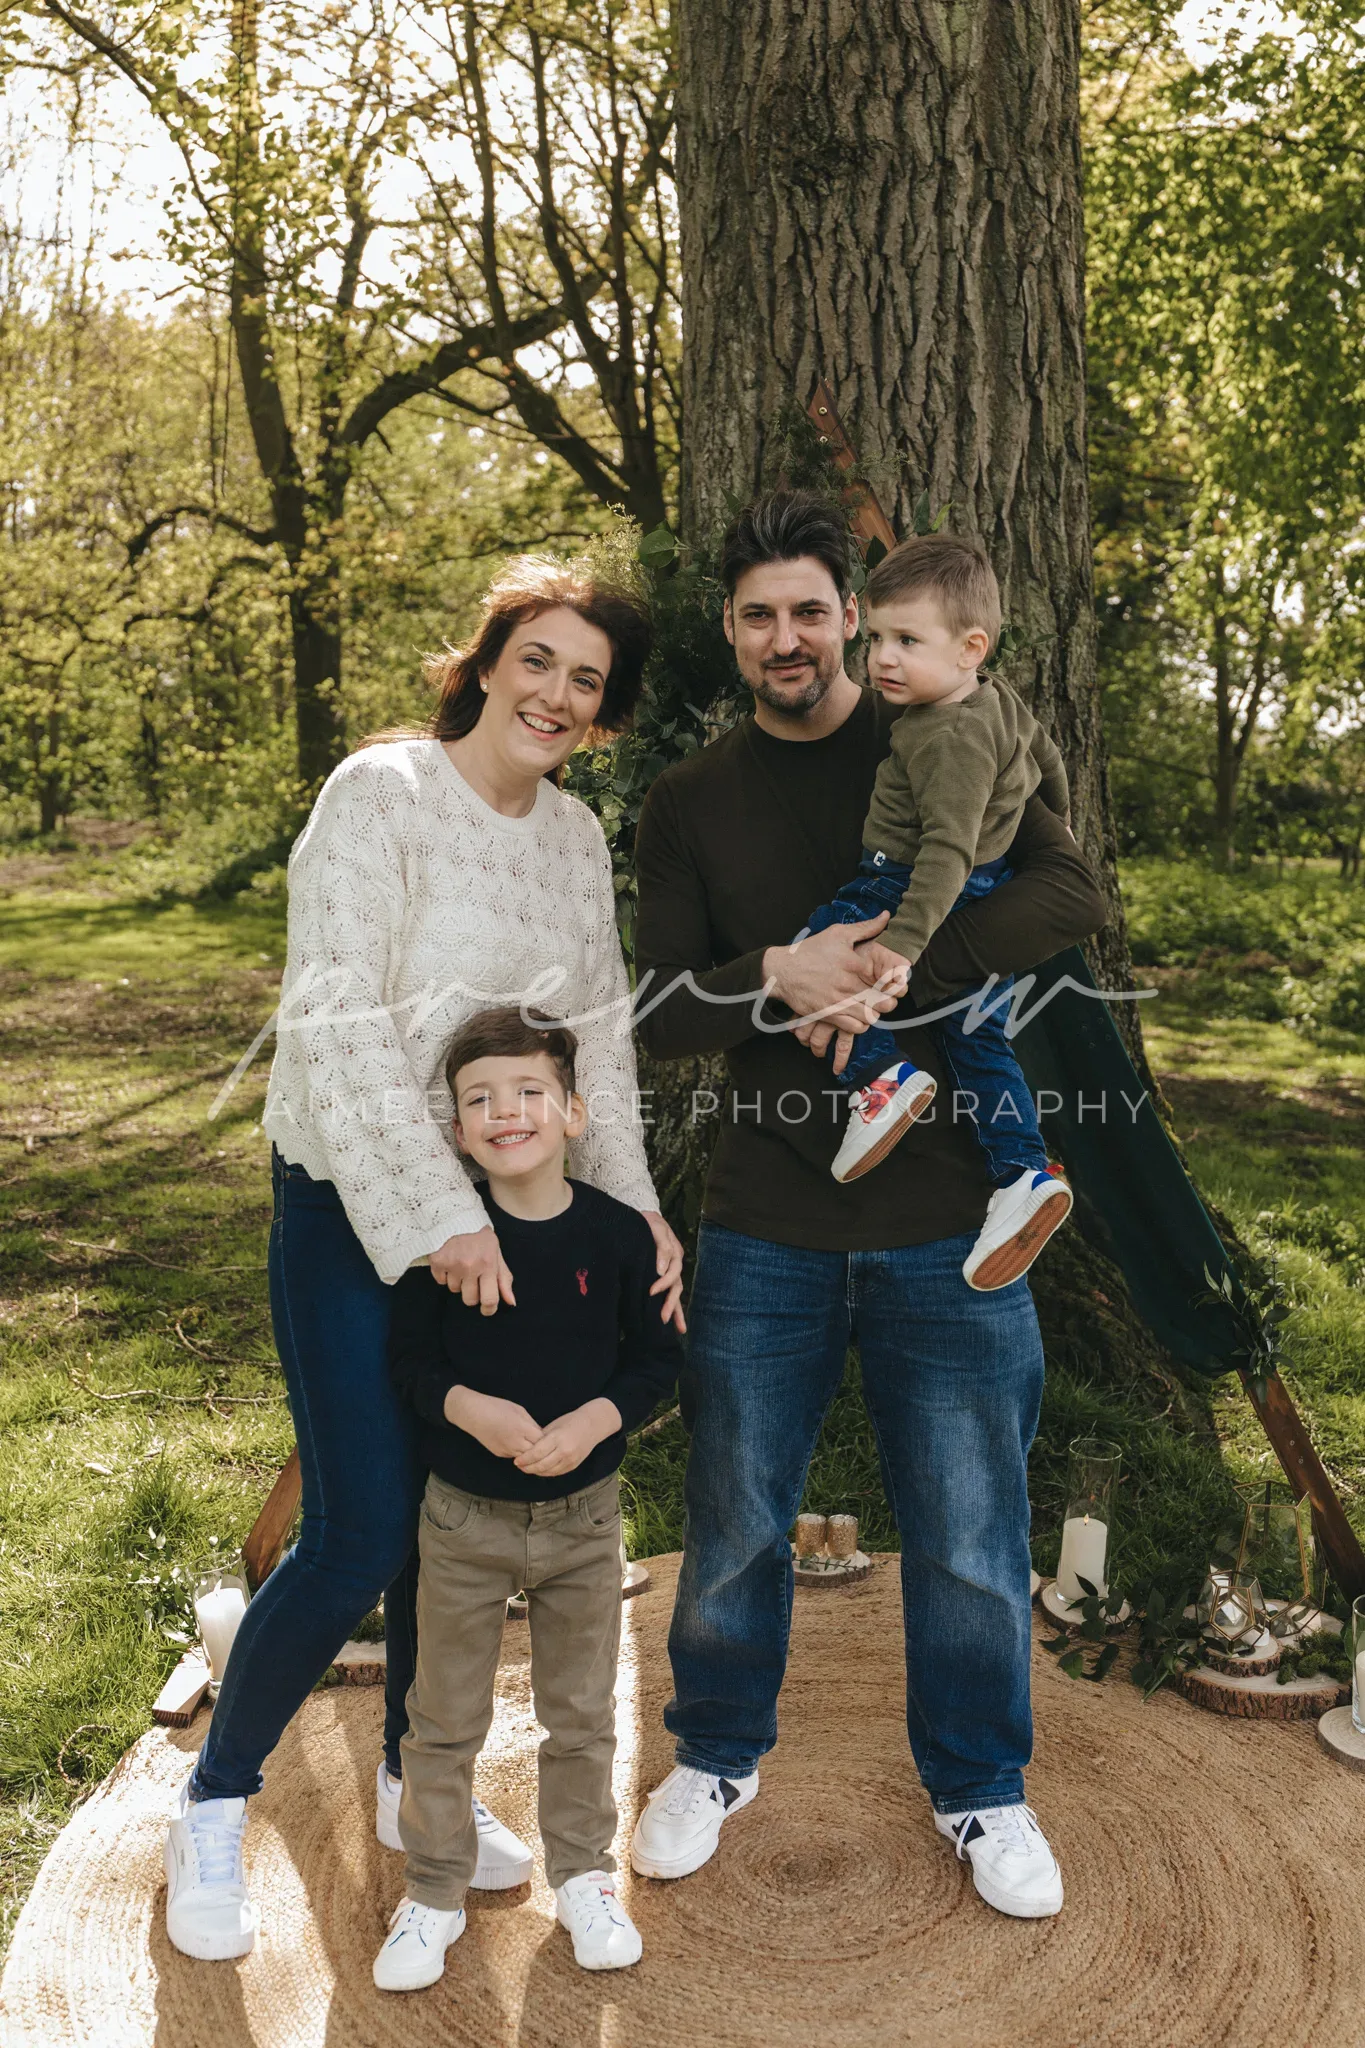 A happy family of four posing outdoors in a park by a large tree. the mother, father, and two young sons all smile at the camera, with one son held in the father's arms and the other standing in front.